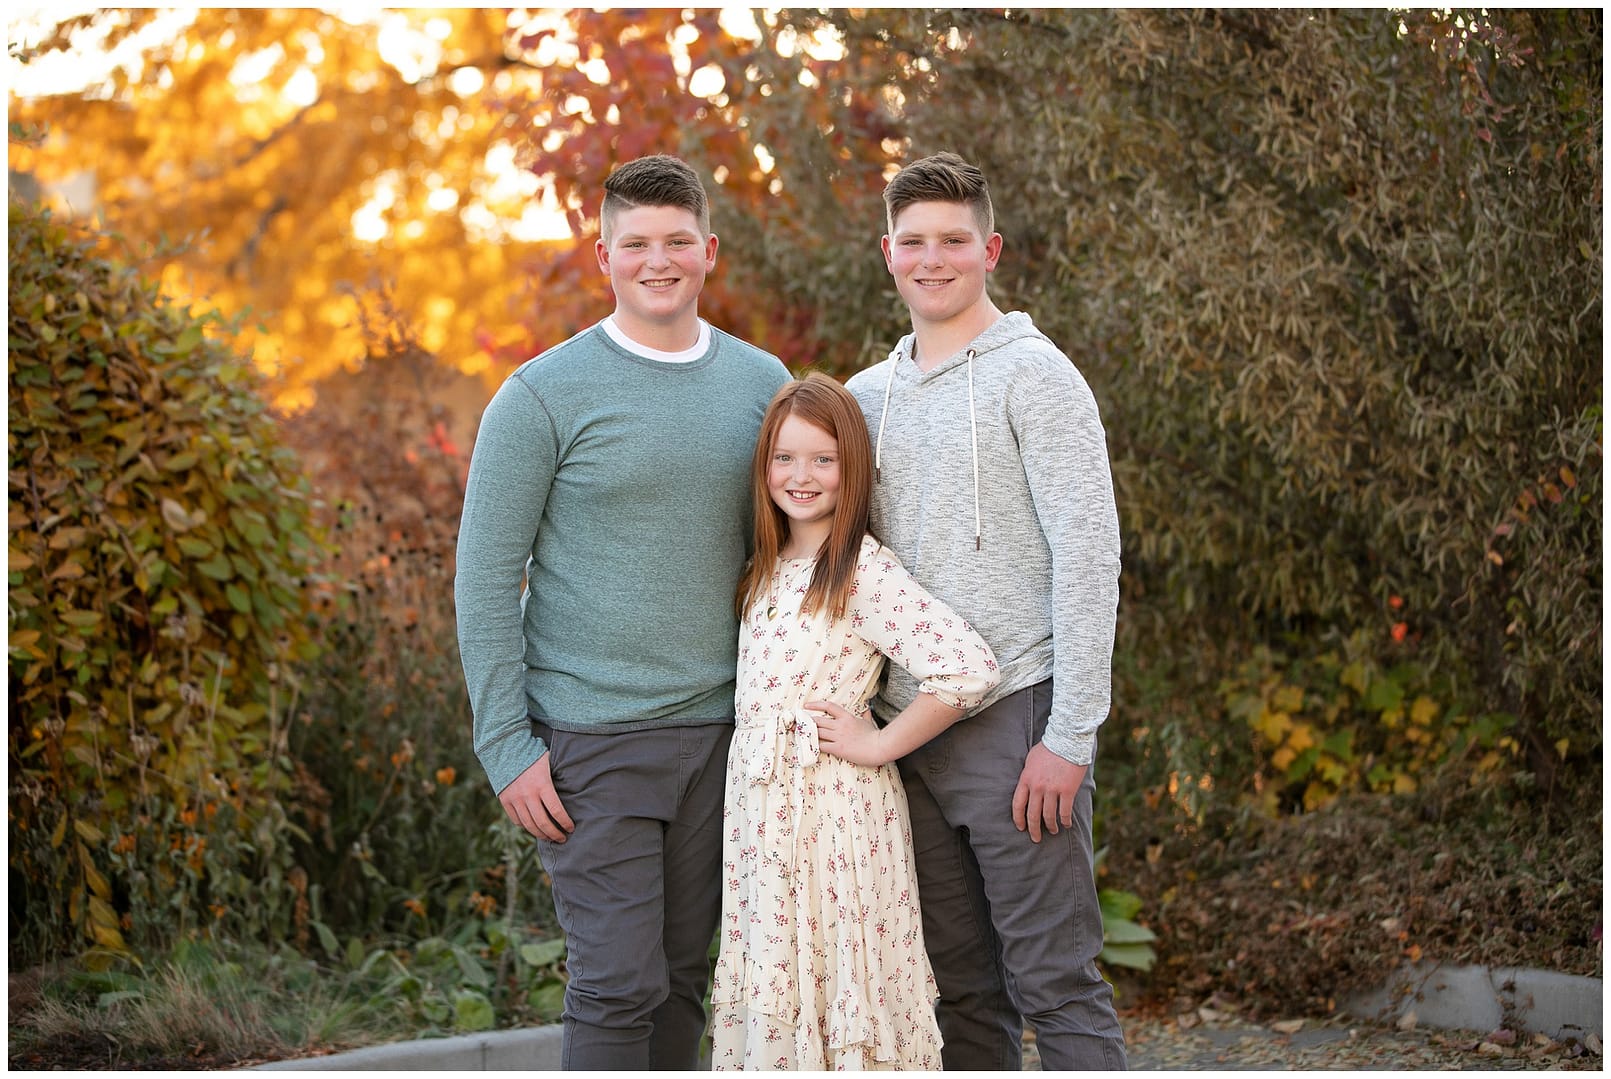 Boise siblings in fall foliage. Photo by Tiffany Hix Photography.